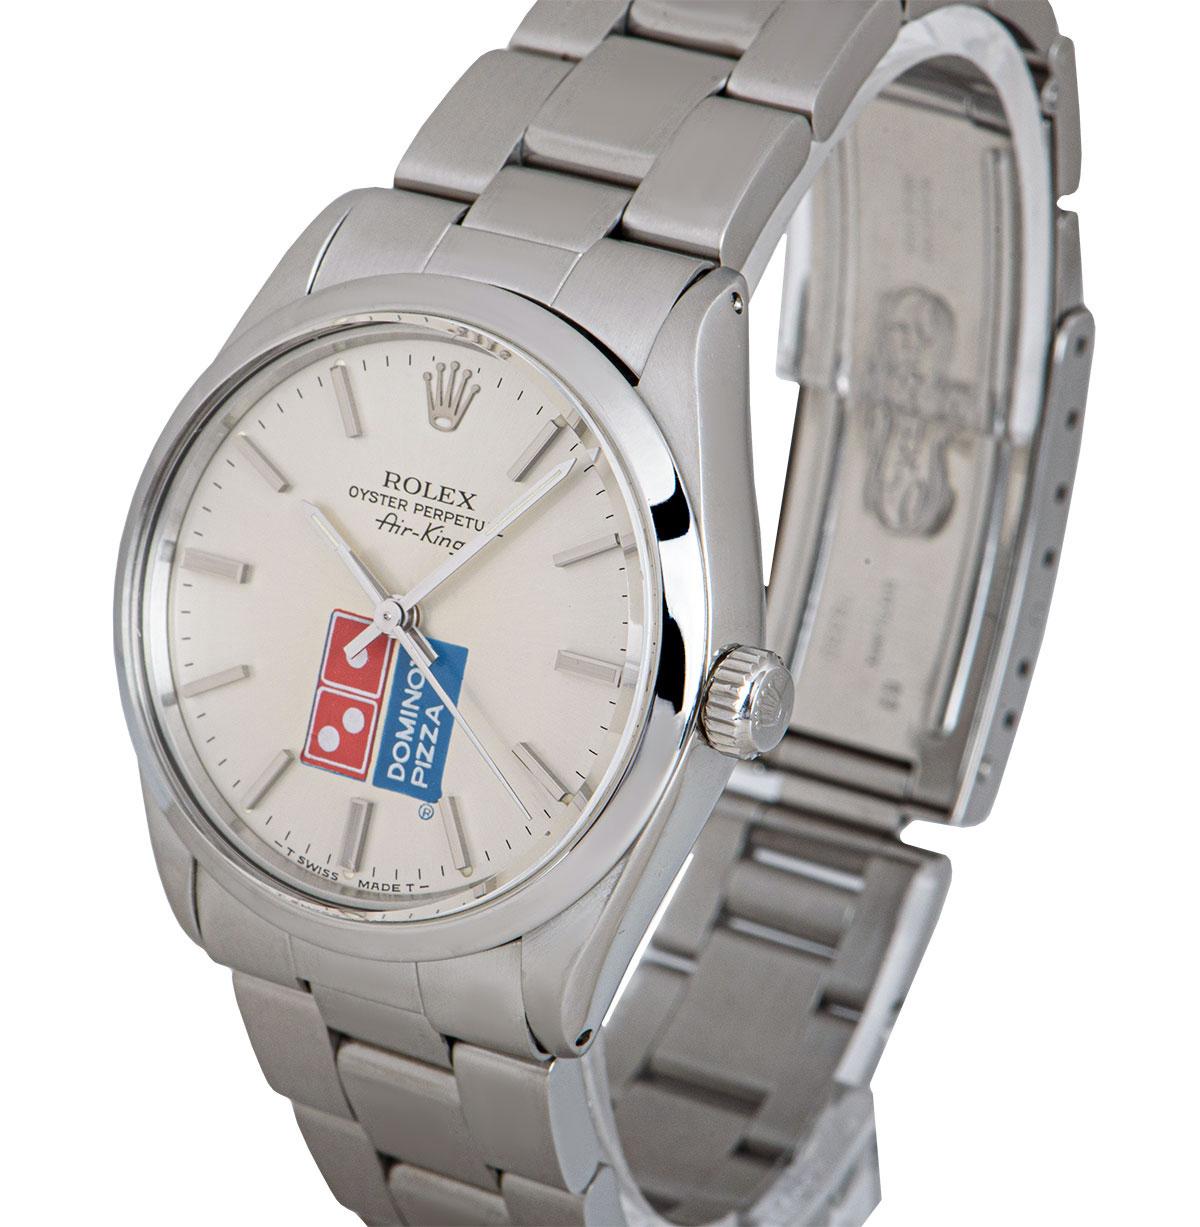 A 34 mm Stainless Steel Oyster Perpetual Air-King Gents Wristwatch, silver dial with applied hour markers, Domino's Pizza logo at 6 0'clock, a fixed stainless steel smooth bezel, a stainless steel oyster bracelet with a stainless steel deployant